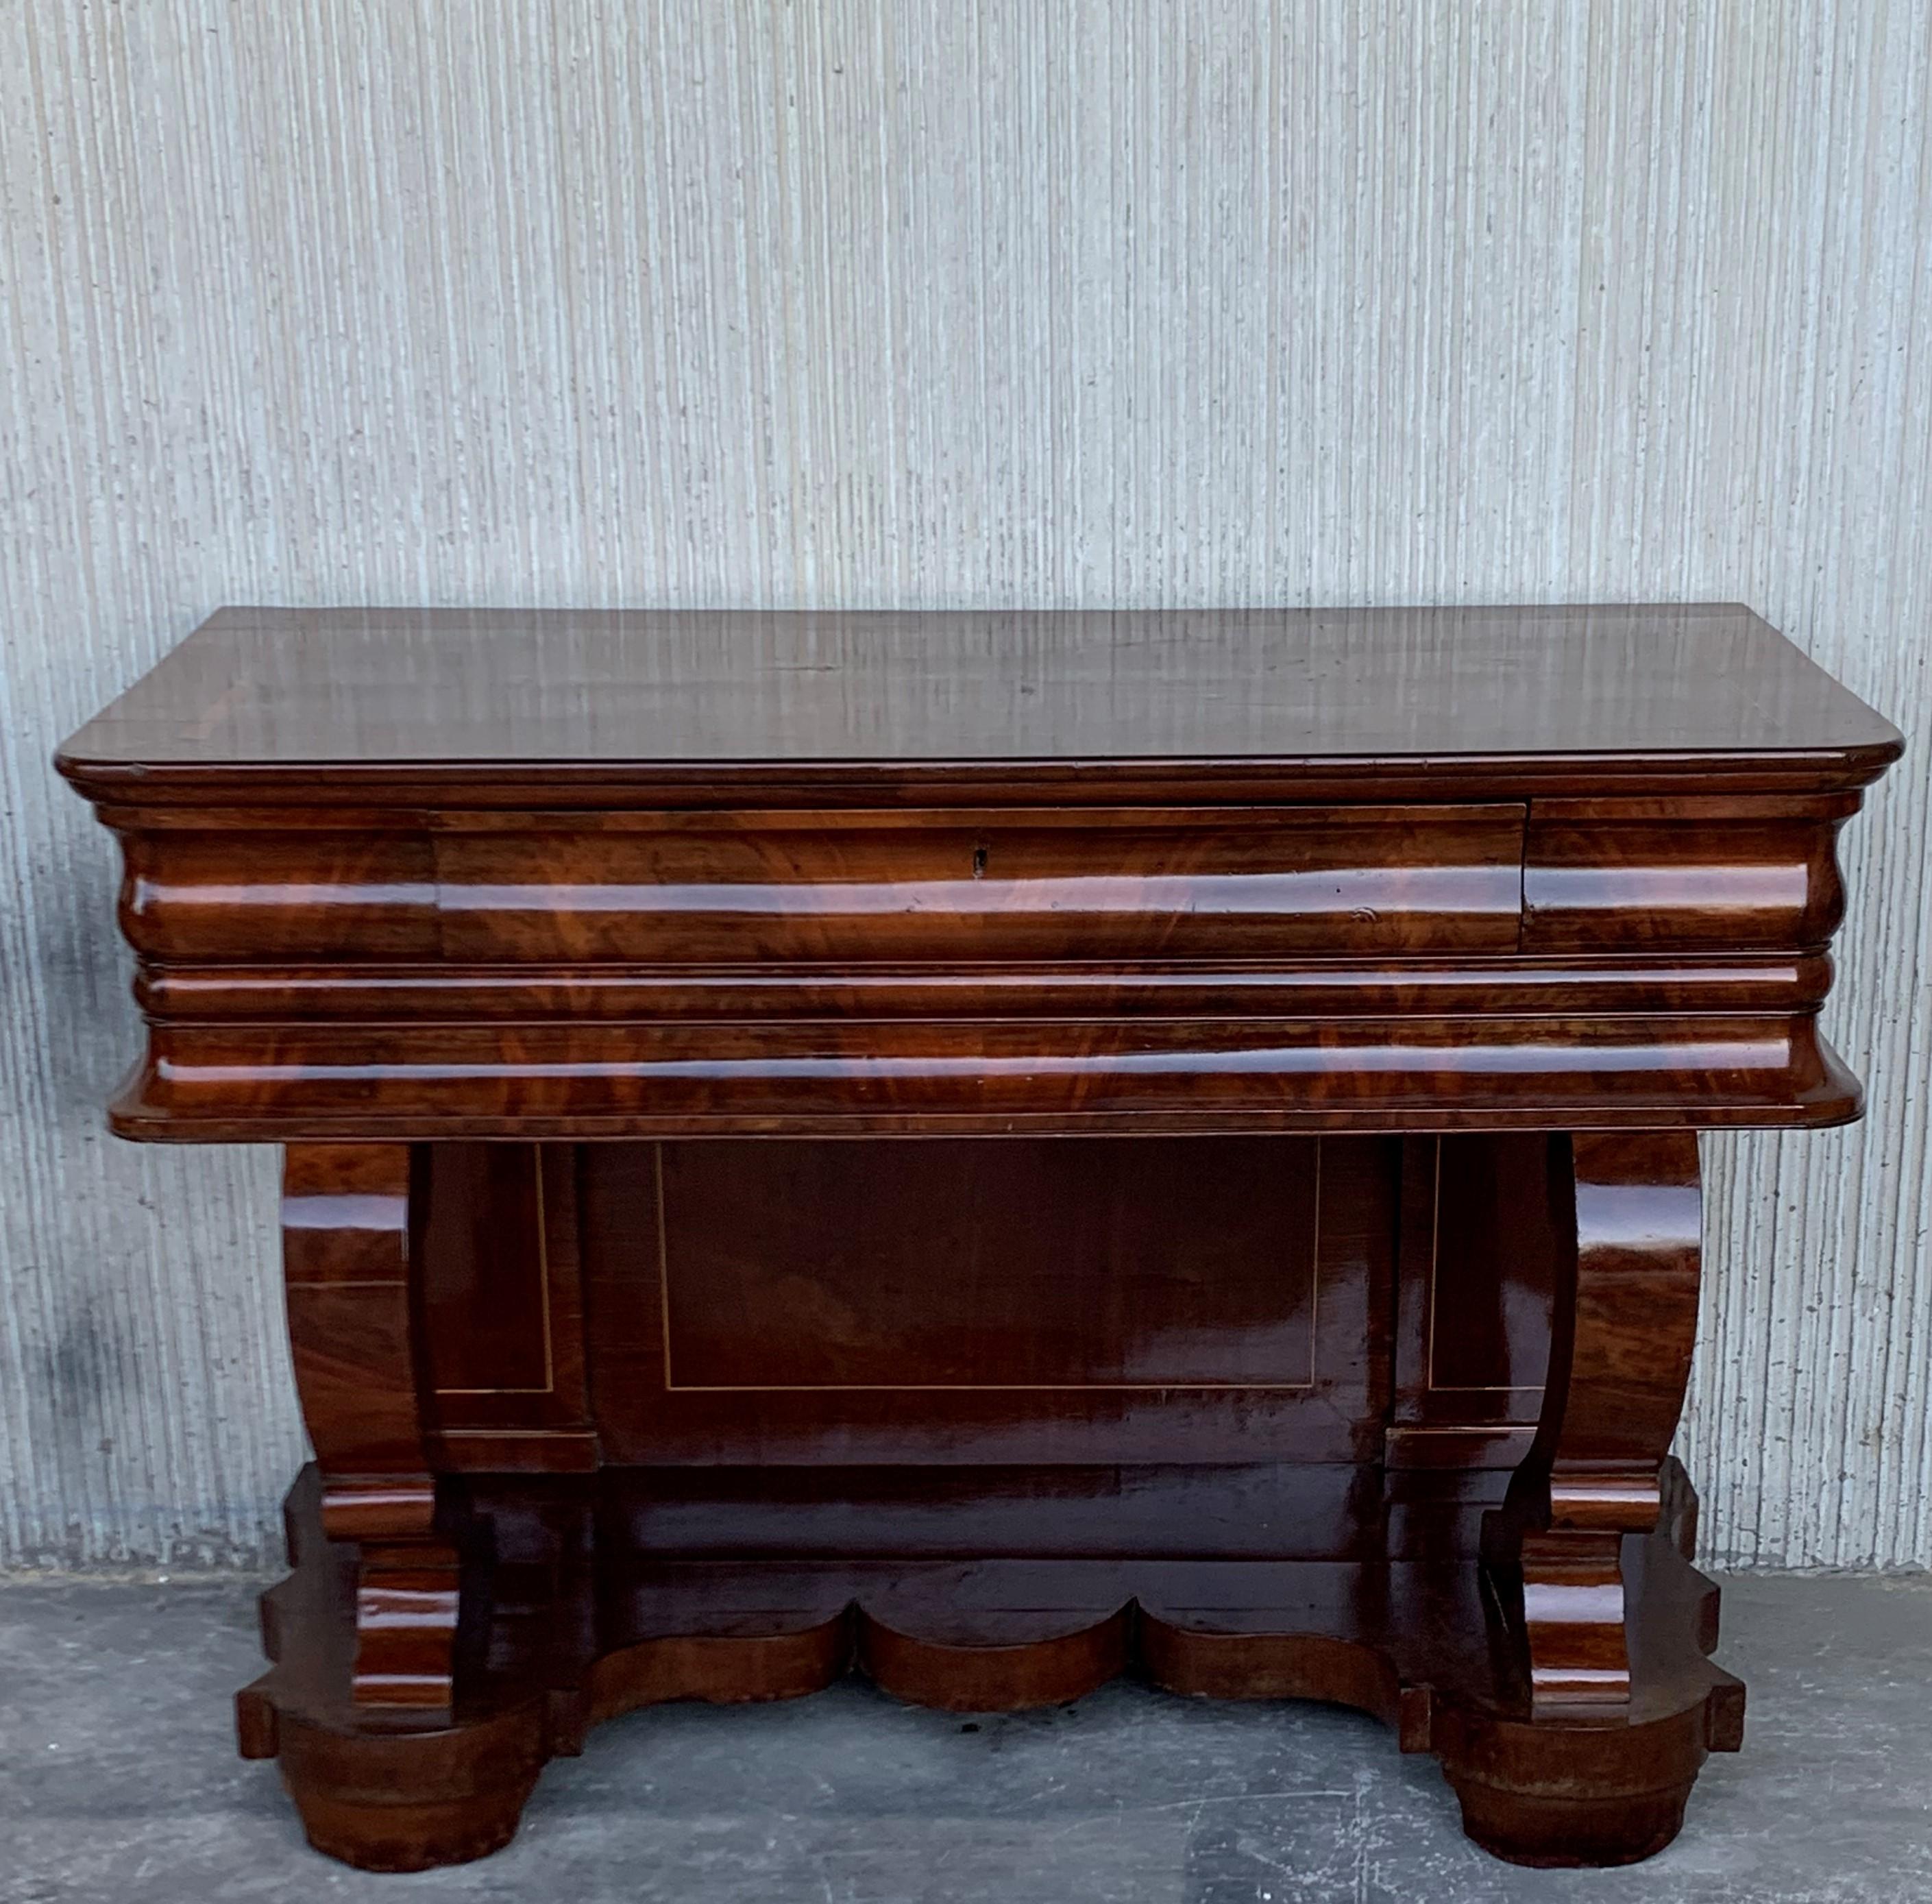 Early Biedermeier Period Walnut Console Table with Drawer, Austria, circa 1830 In Good Condition For Sale In Miami, FL